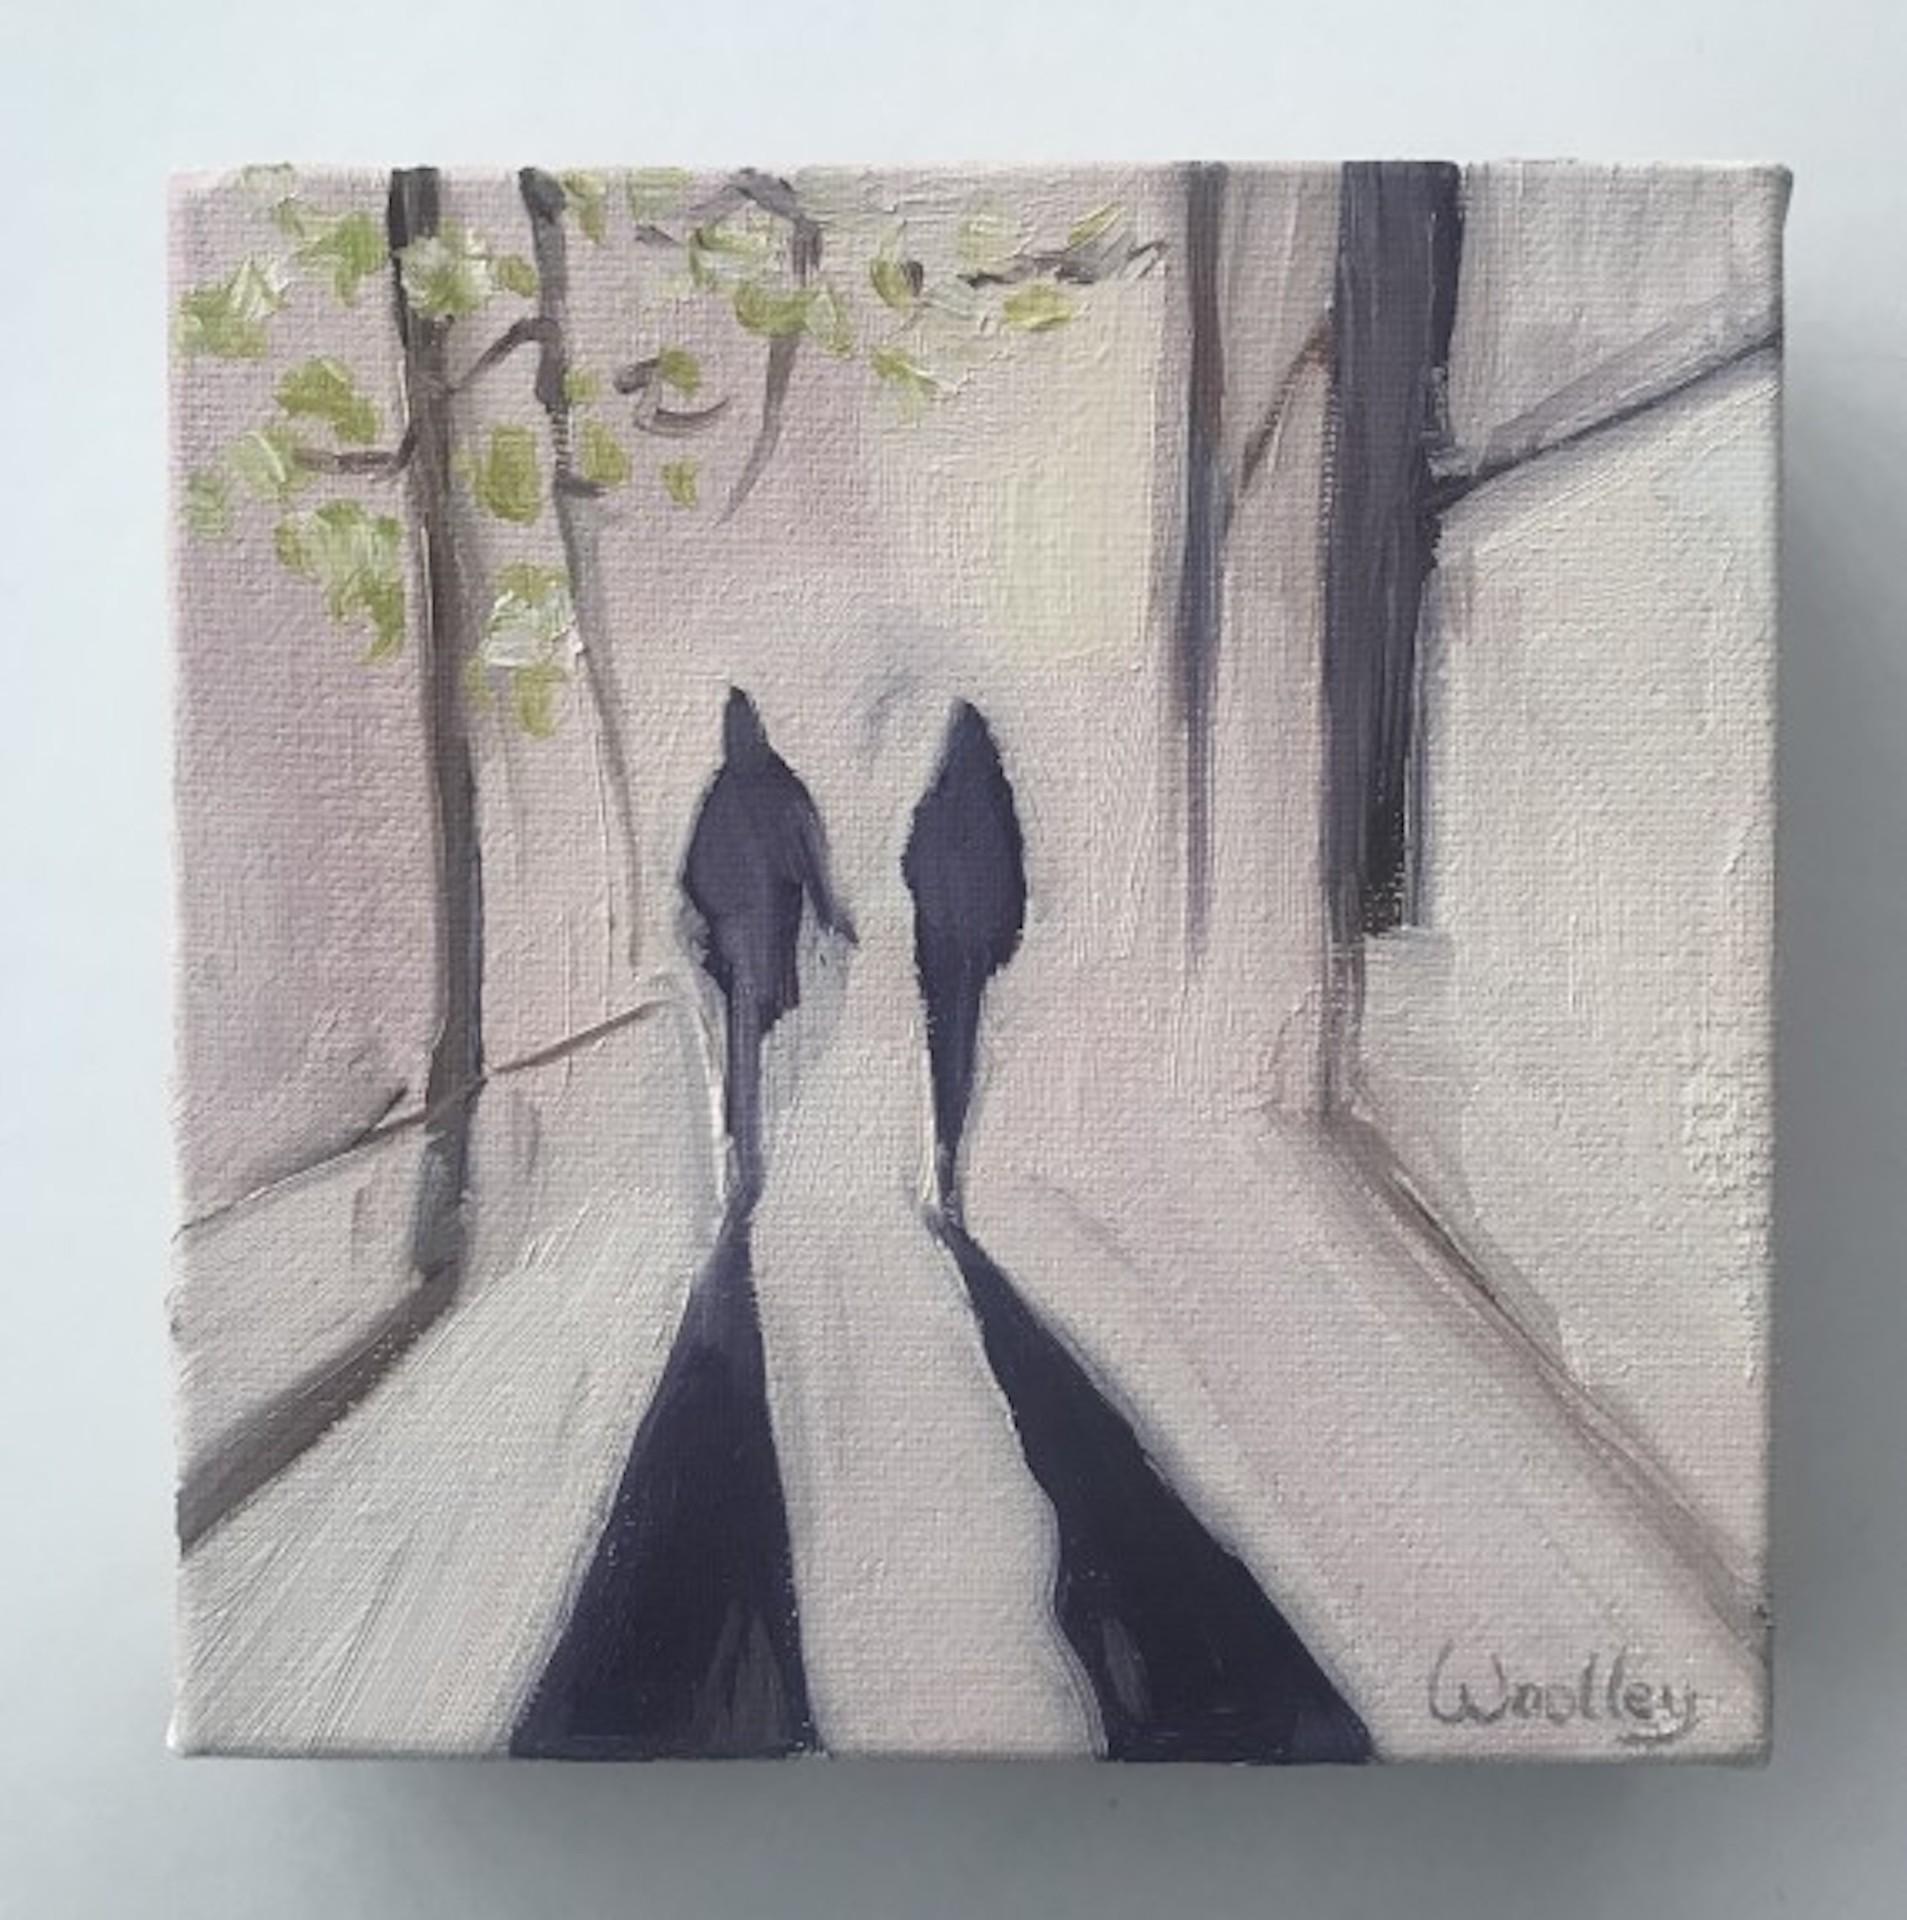 Eleanor Woolley
Winter Shadows 17
Original Painting
Oil Paint on Canvas
Size: H:15 cm x W:15 cm x D:4cm
Sold Unframed

Please note that insitu images are purely an indication of how a piece may look

Winter shadows 17 is an original figurative